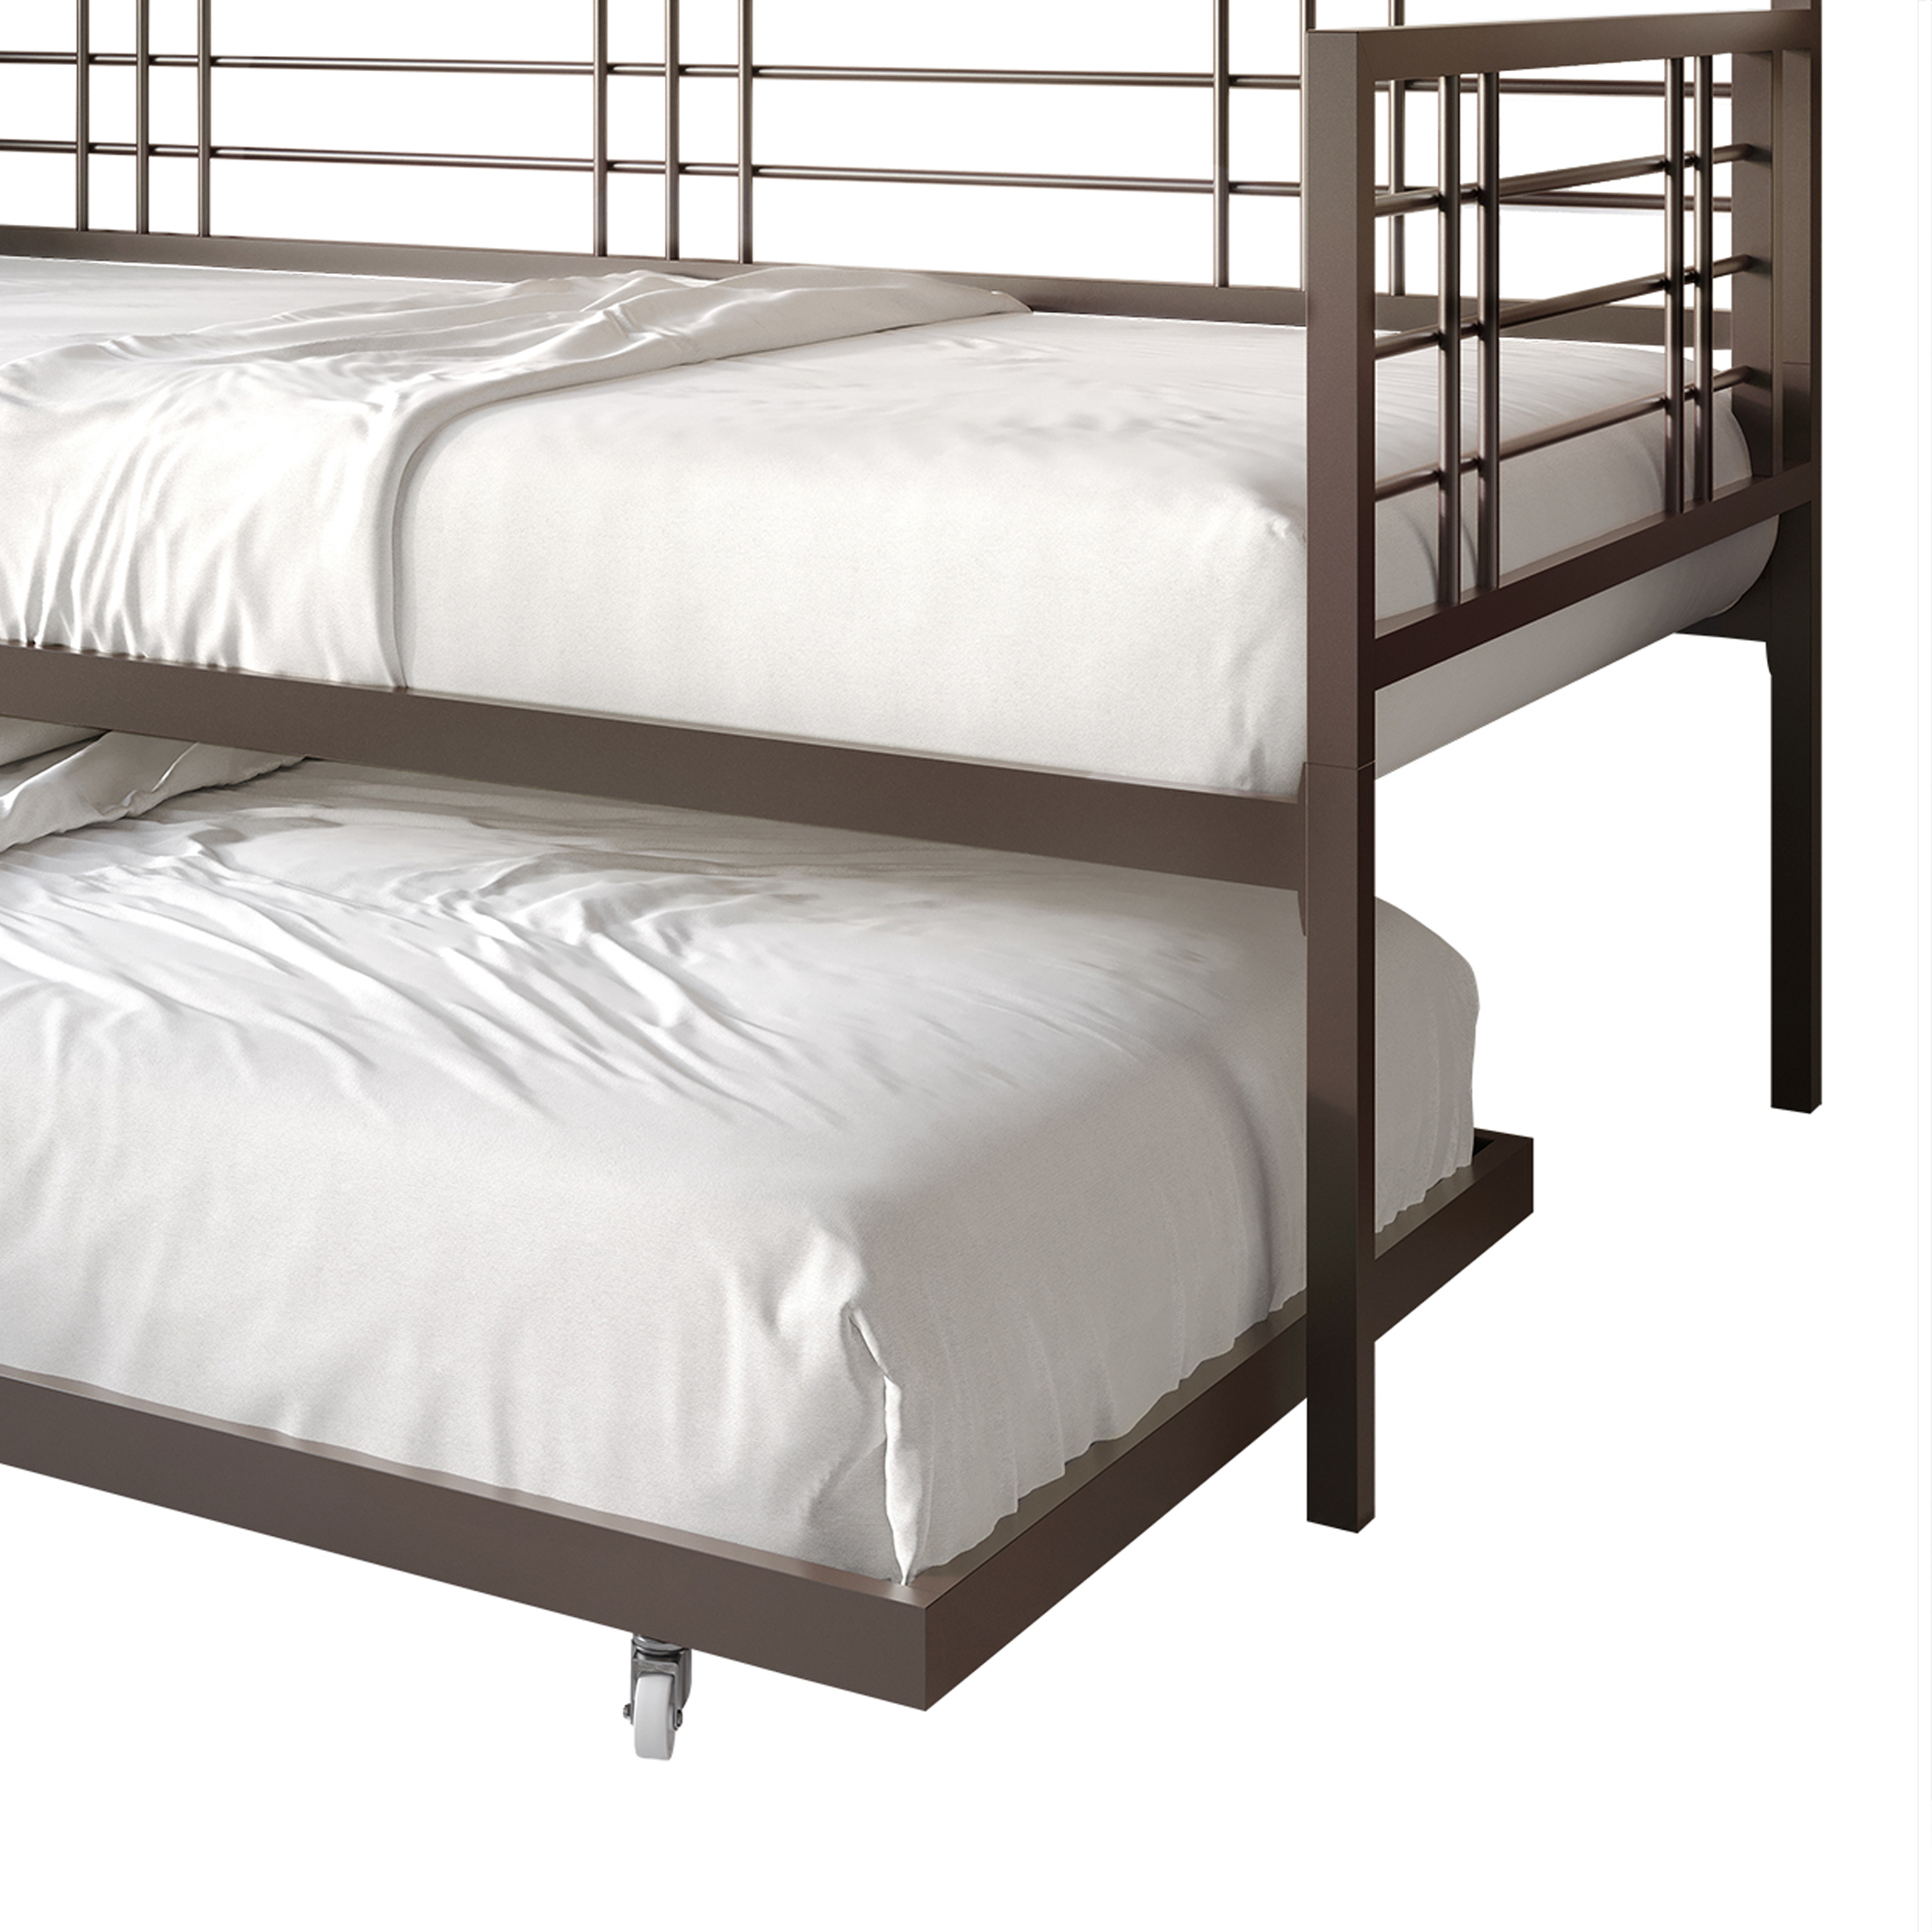 Castle Place Elegance Twin Size Metal Daybed with Trundle, Brown - image 5 of 7